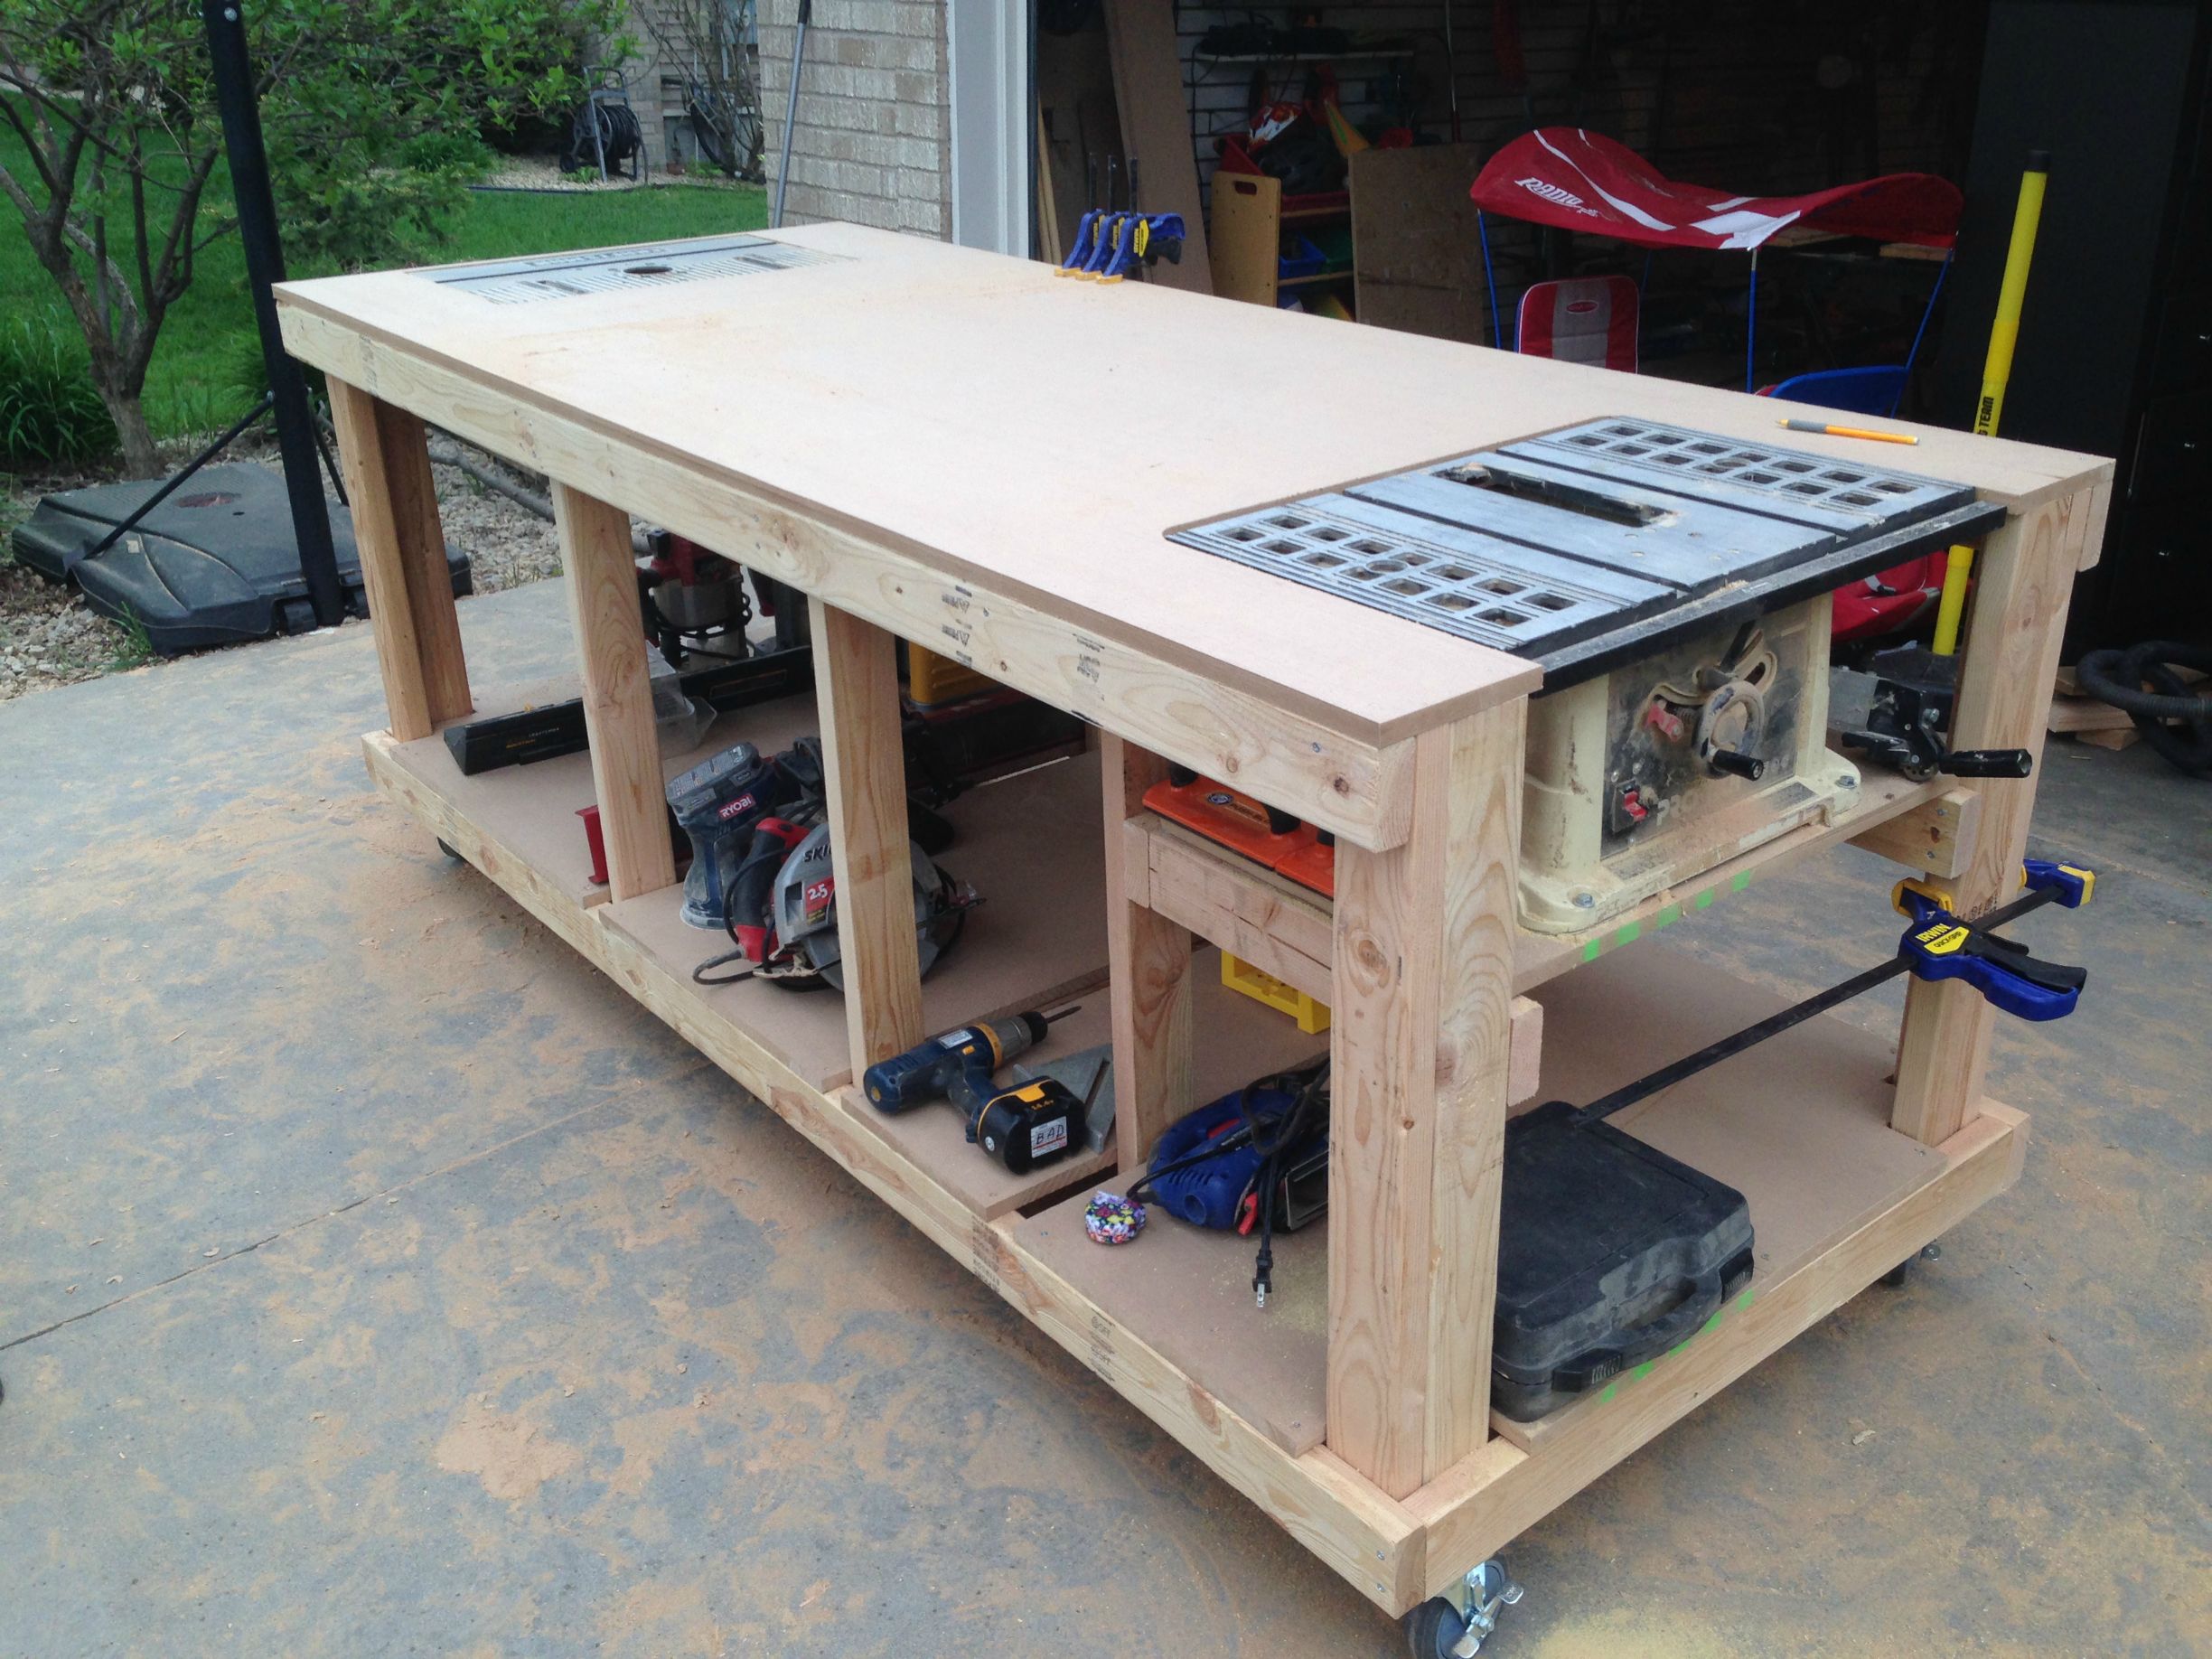 Building Your Own Wooden Workbench | Make: